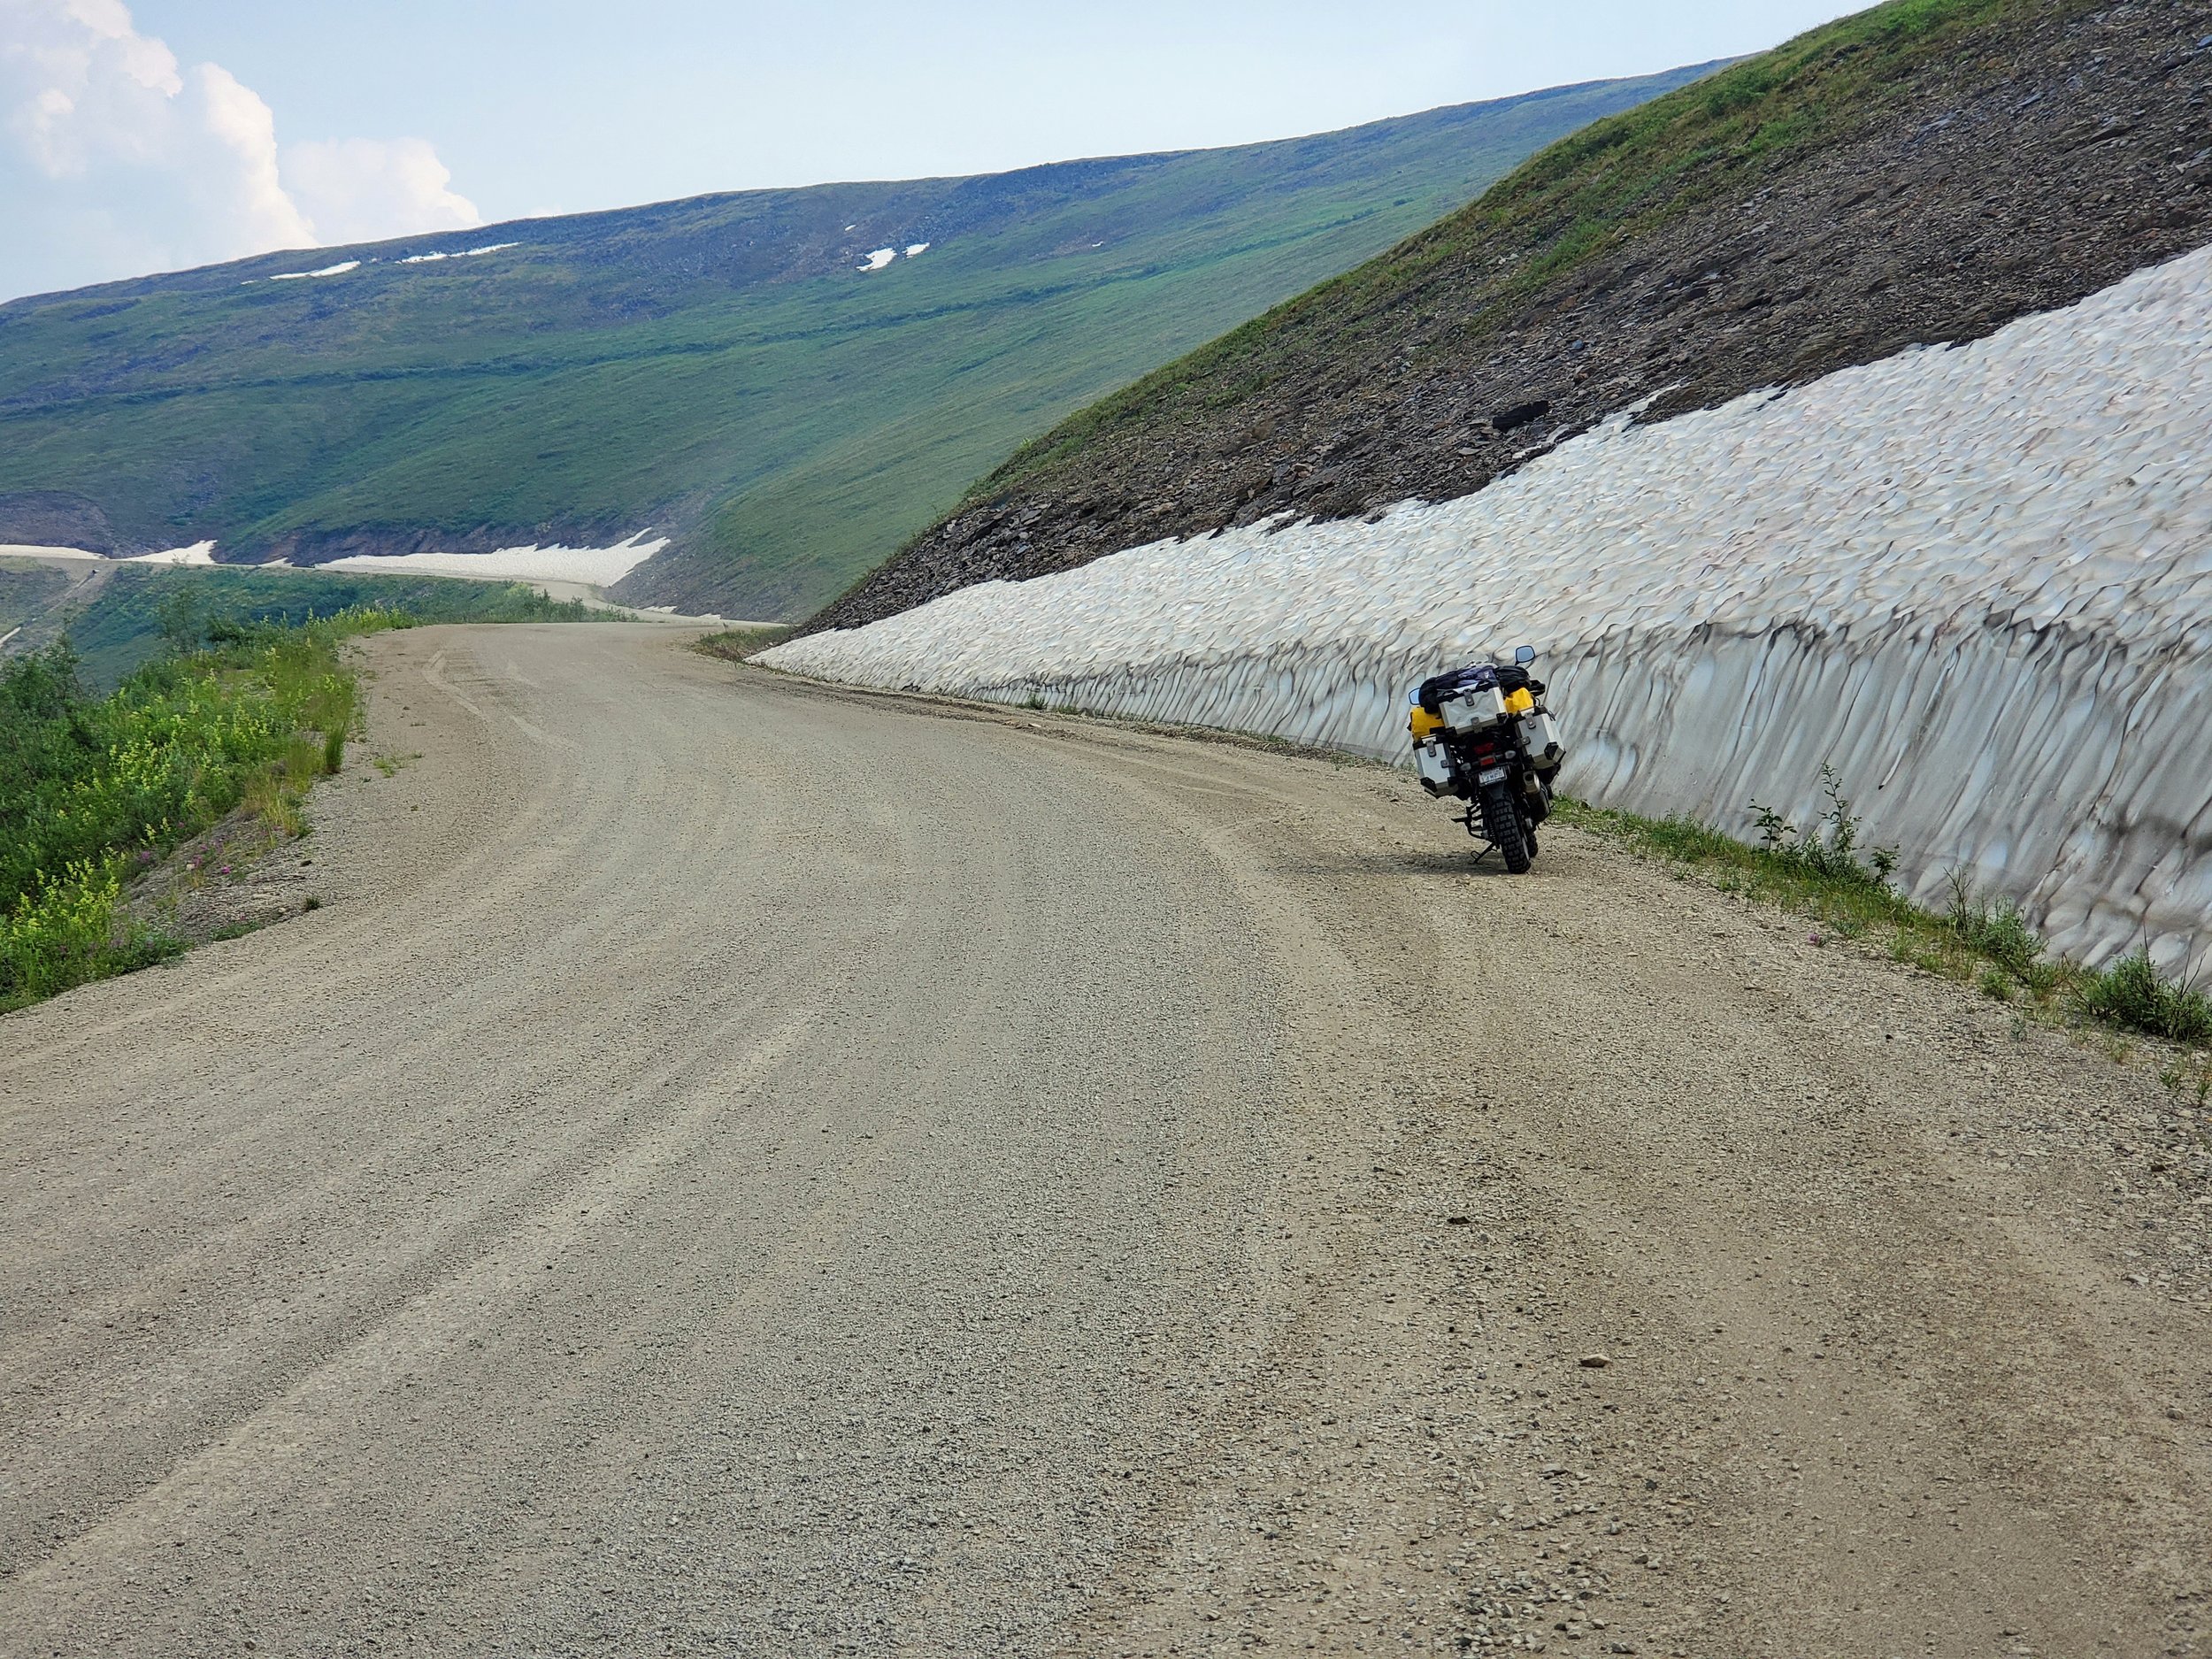  Calcium chloride can destroy brake pads, clog radiators, and shred fork seals. Graders leave berms down the middle of the road. And then there’s the dust. Gravel roads, however, are preferable to many paved sections which are often riddled with mass